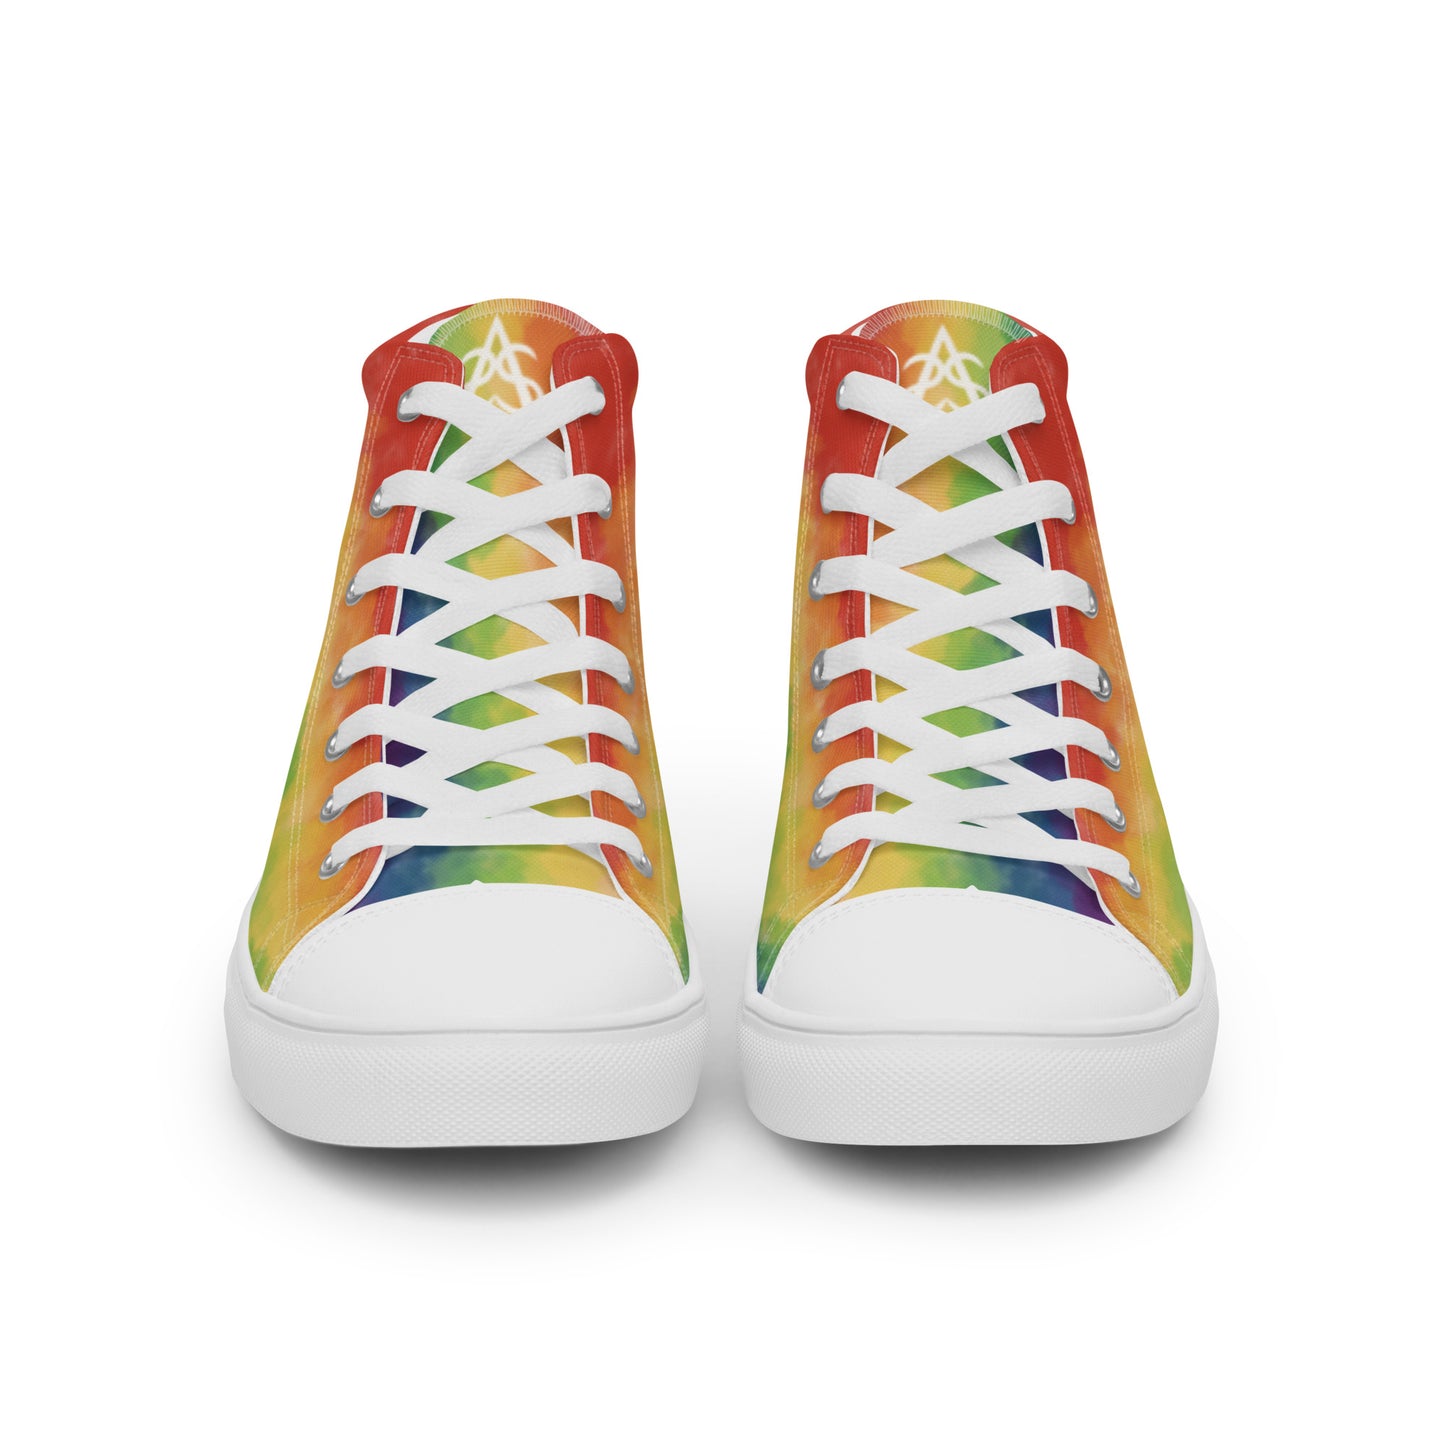 Front view: A pair of high top shoes with rainbow striped clouds on the sides and a double heart in black and brown with the trans flag colors inside.